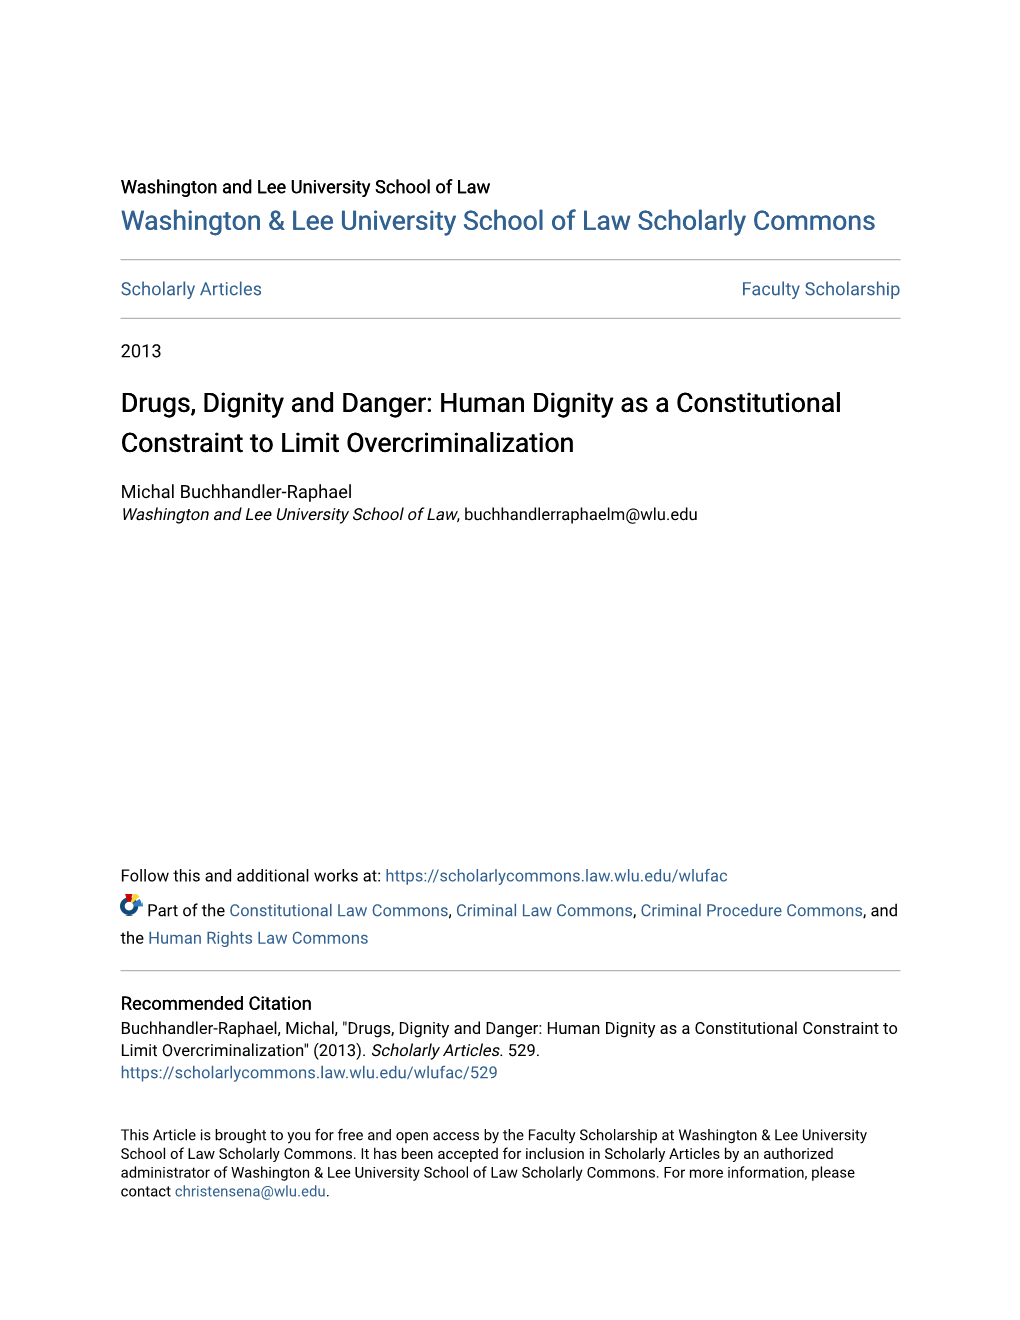 Human Dignity As a Constitutional Constraint to Limit Overcriminalization